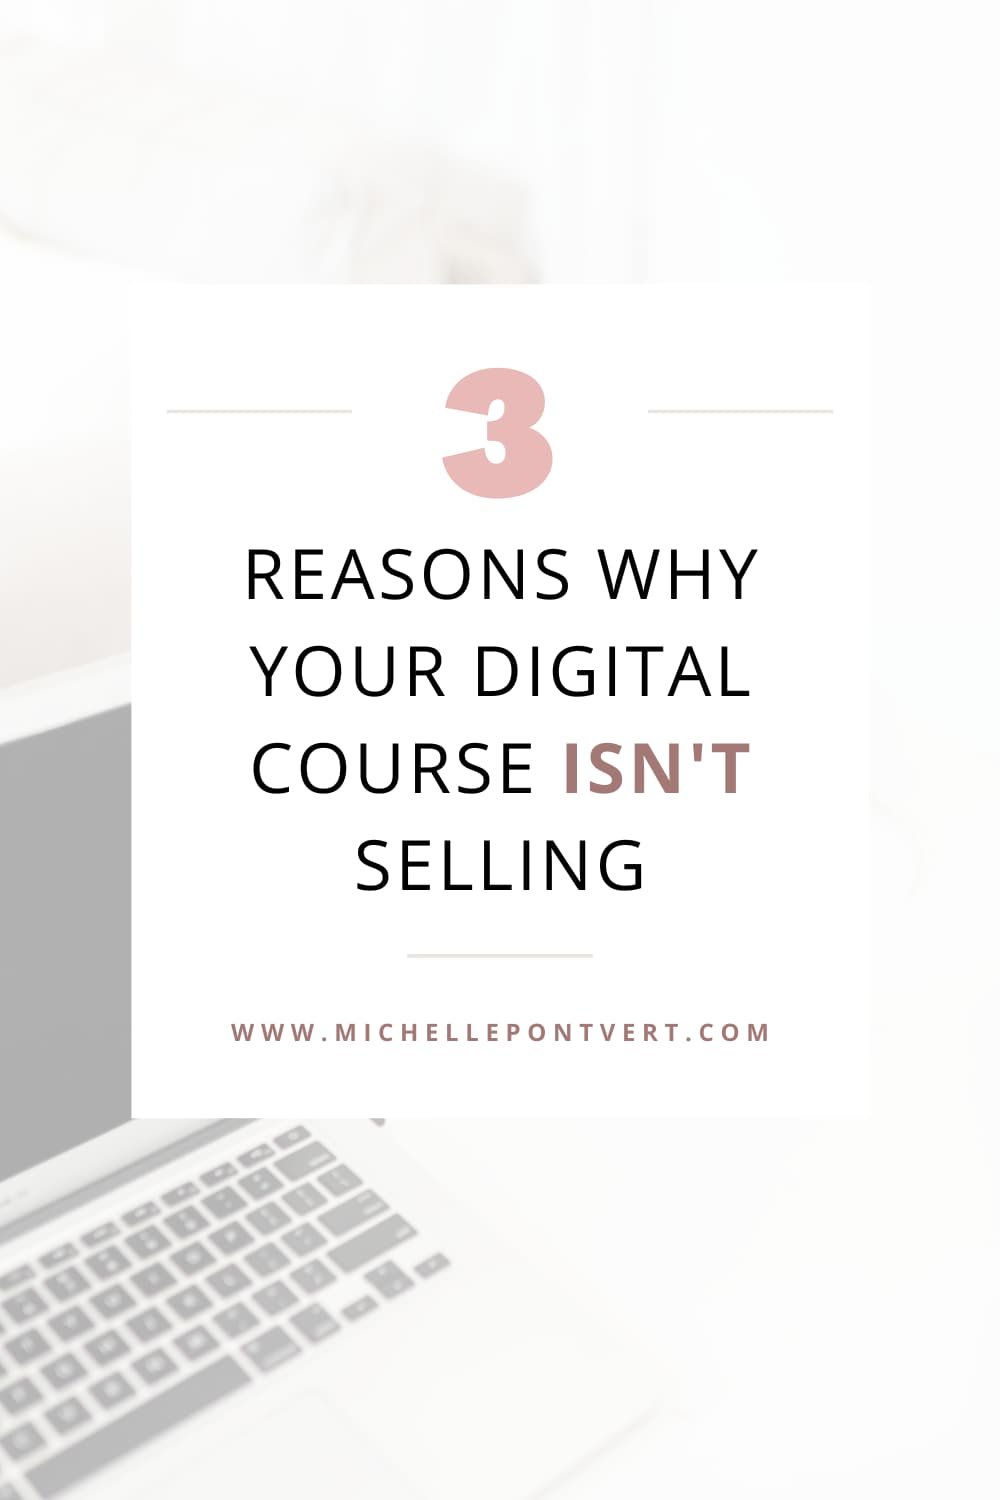 Here's Why Your Online Course Isn't Selling (And What To Do About